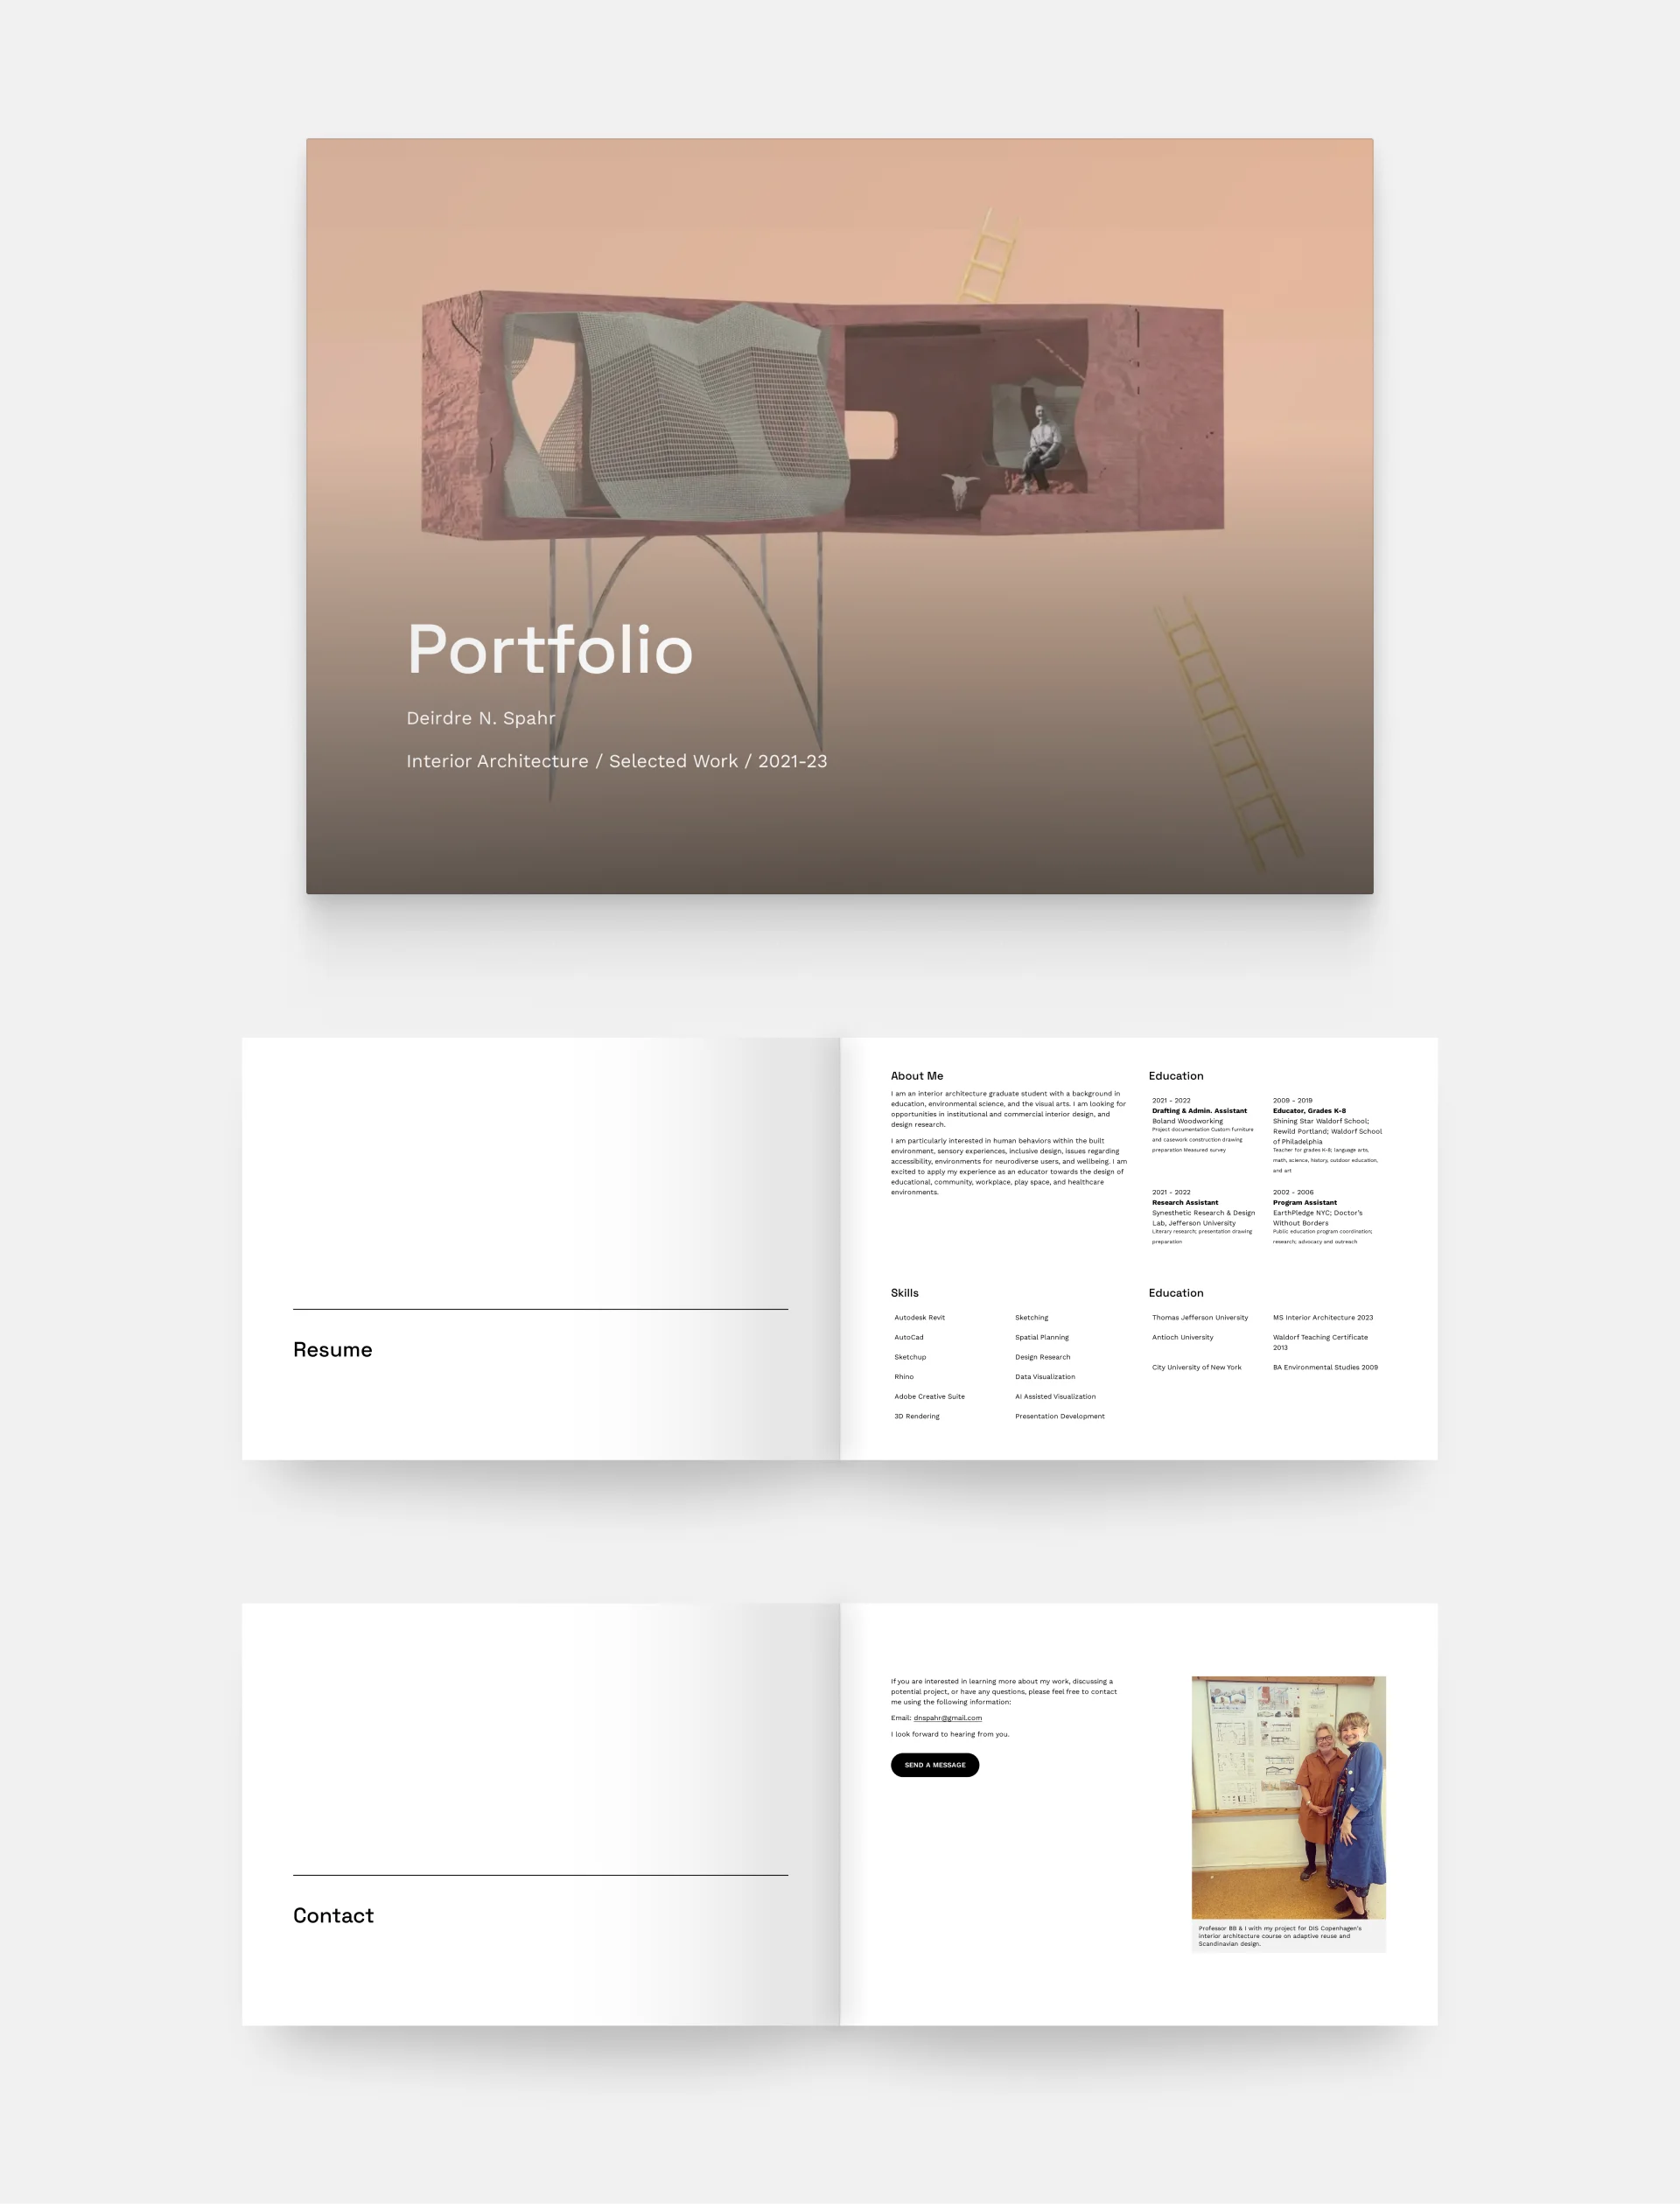 The architecture portfolio cover and 4 pages from Deirdre Spahr's portfolio